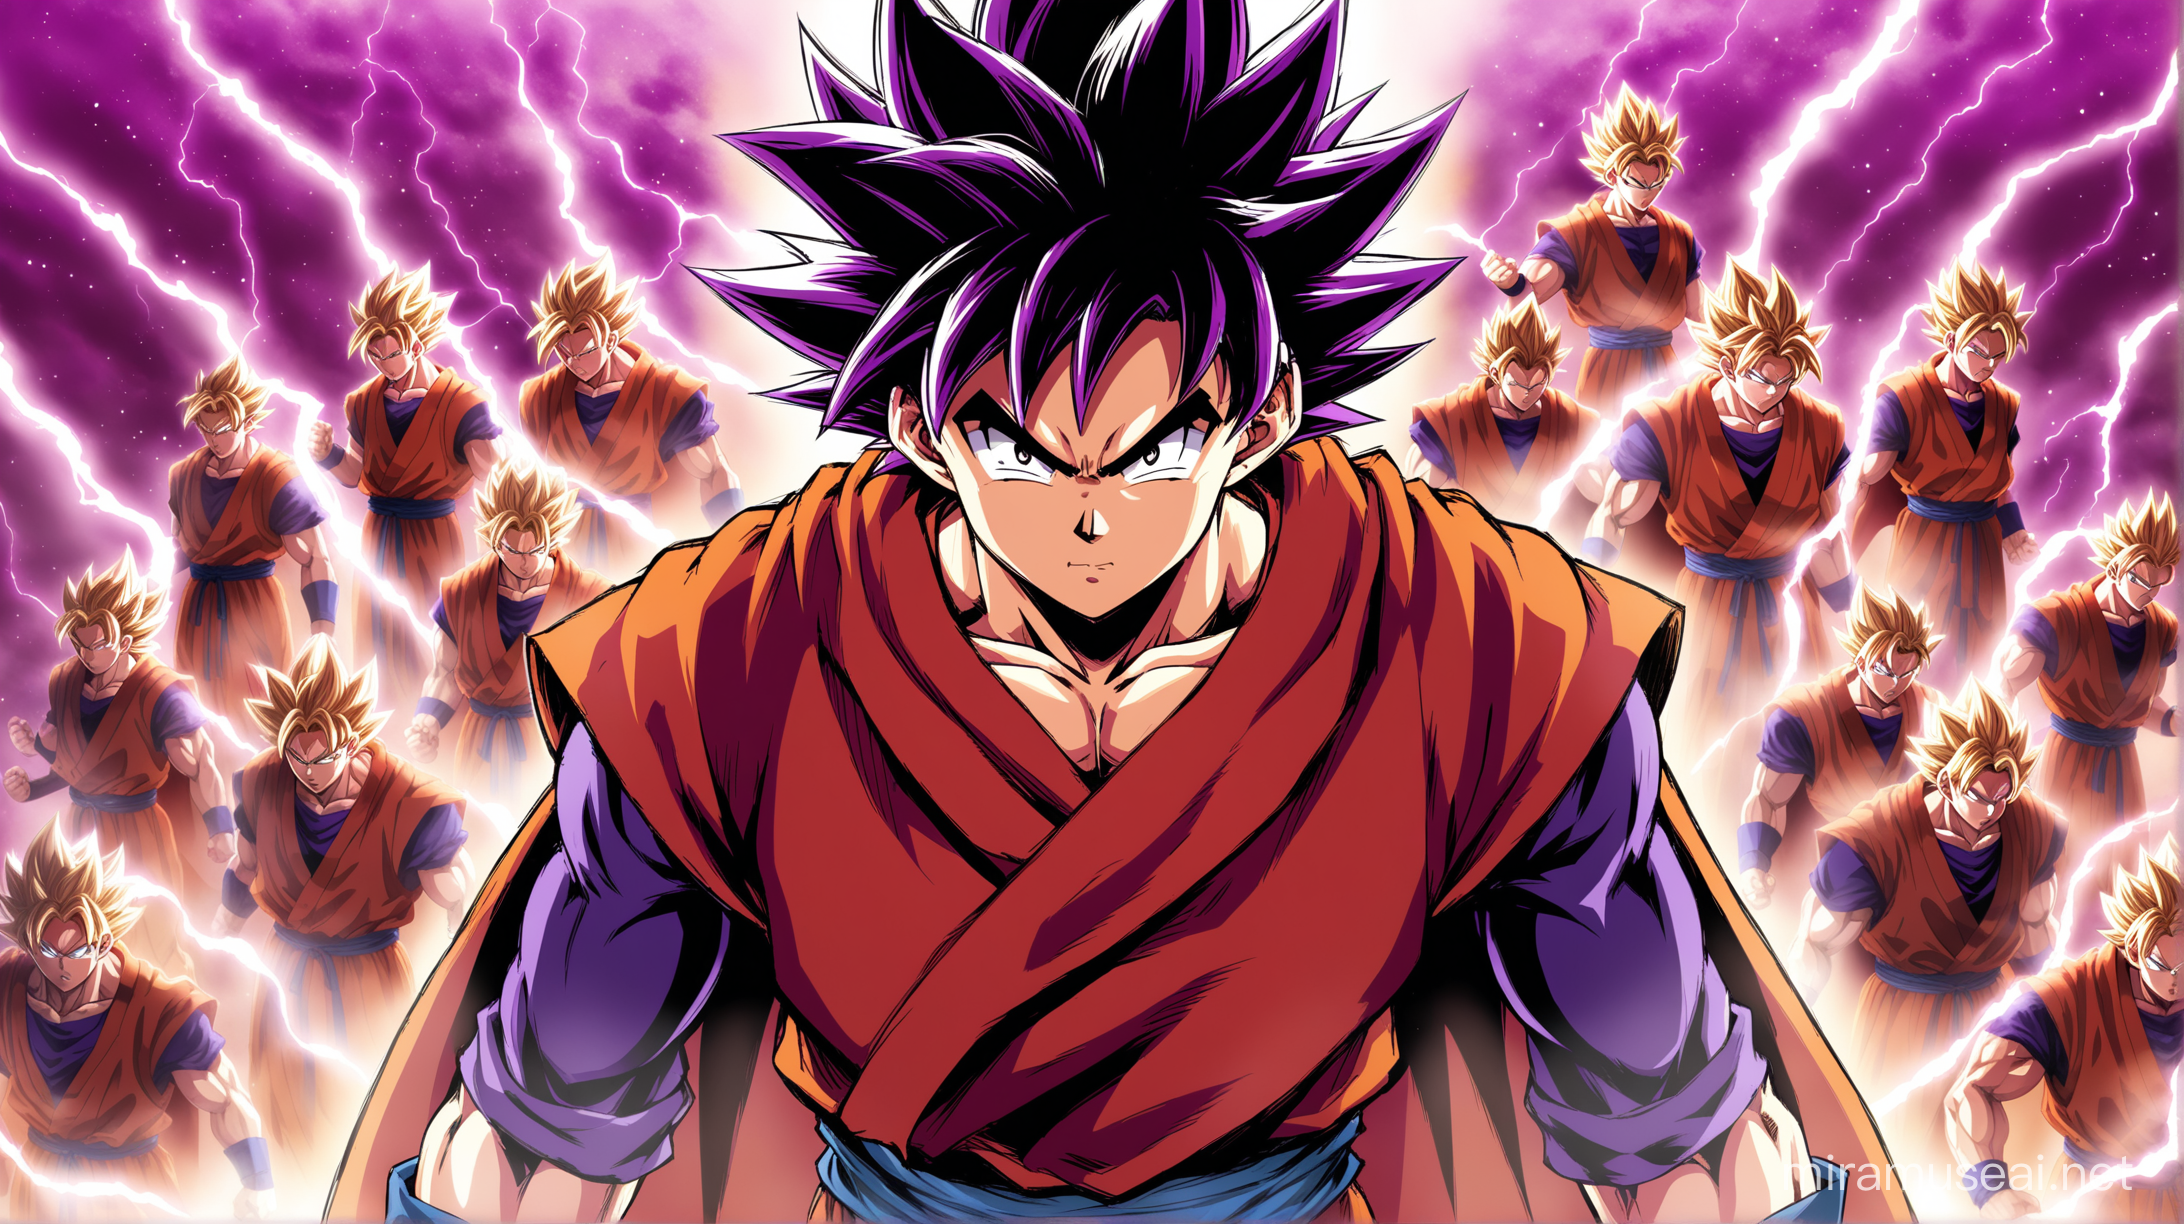 lean Goku with a red cape. He's a leader, there are men behind him, they are preparing for warm the background is purple, everyone is different has different hair and clothes